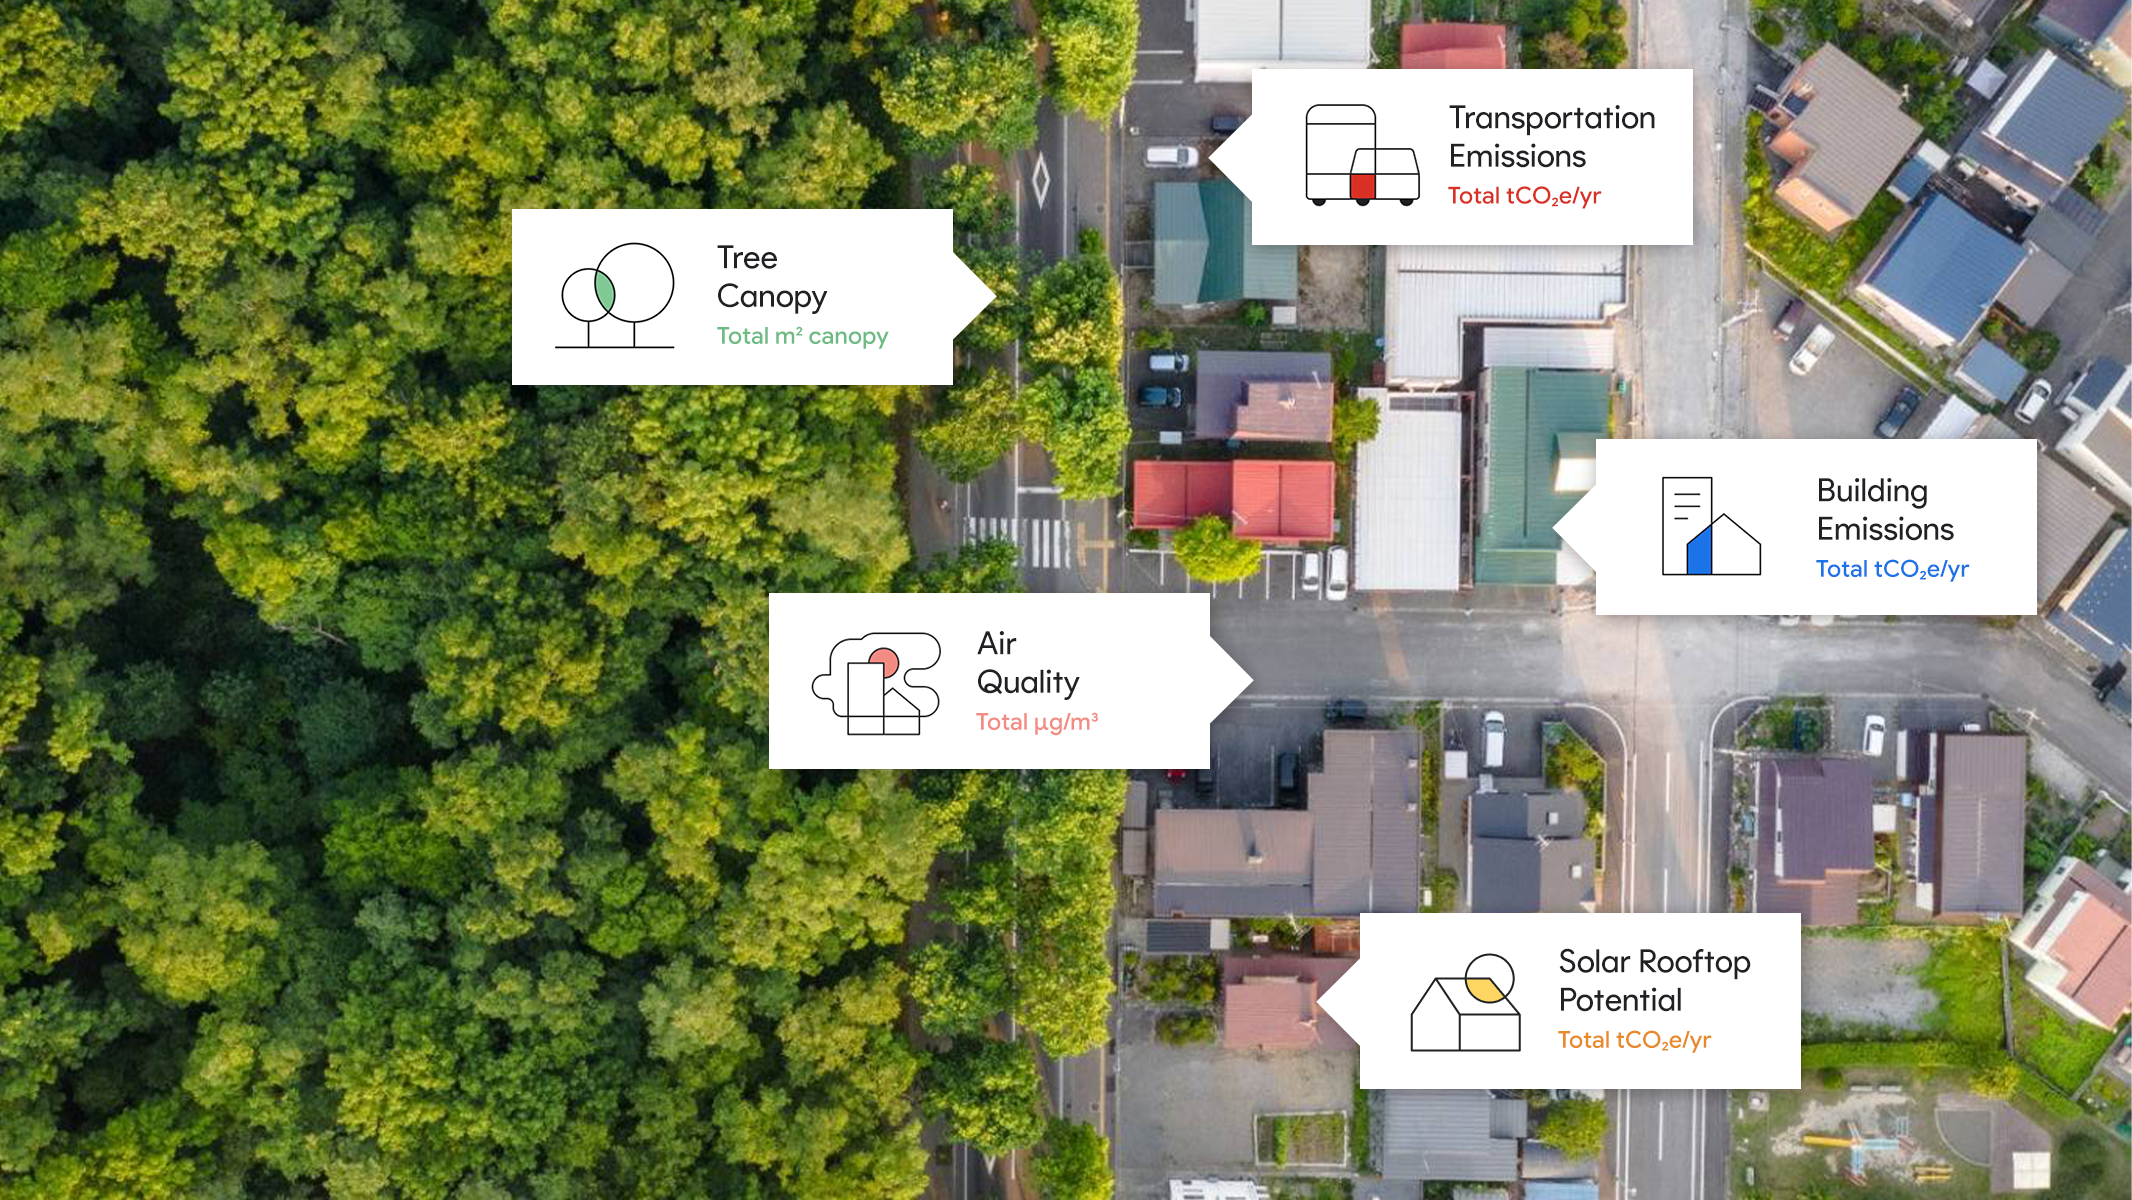 Aerial photo of a city block with trees and tree canopy data tag on left and solar rooftop potential, air quality, transportation emissions, and building emissions data tags on right.